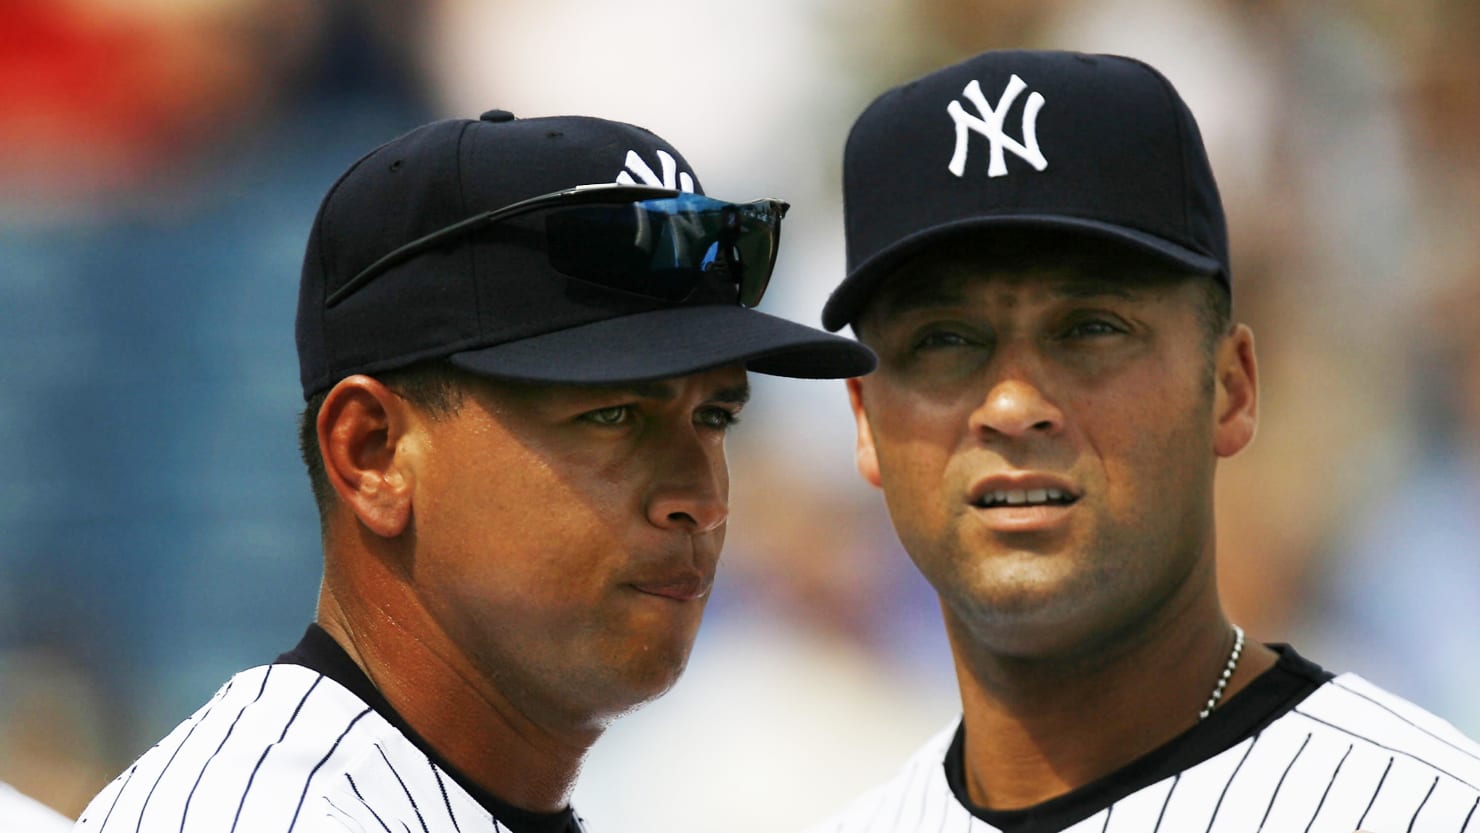 Drop the apathy and root for the United States, Derek Jeter and